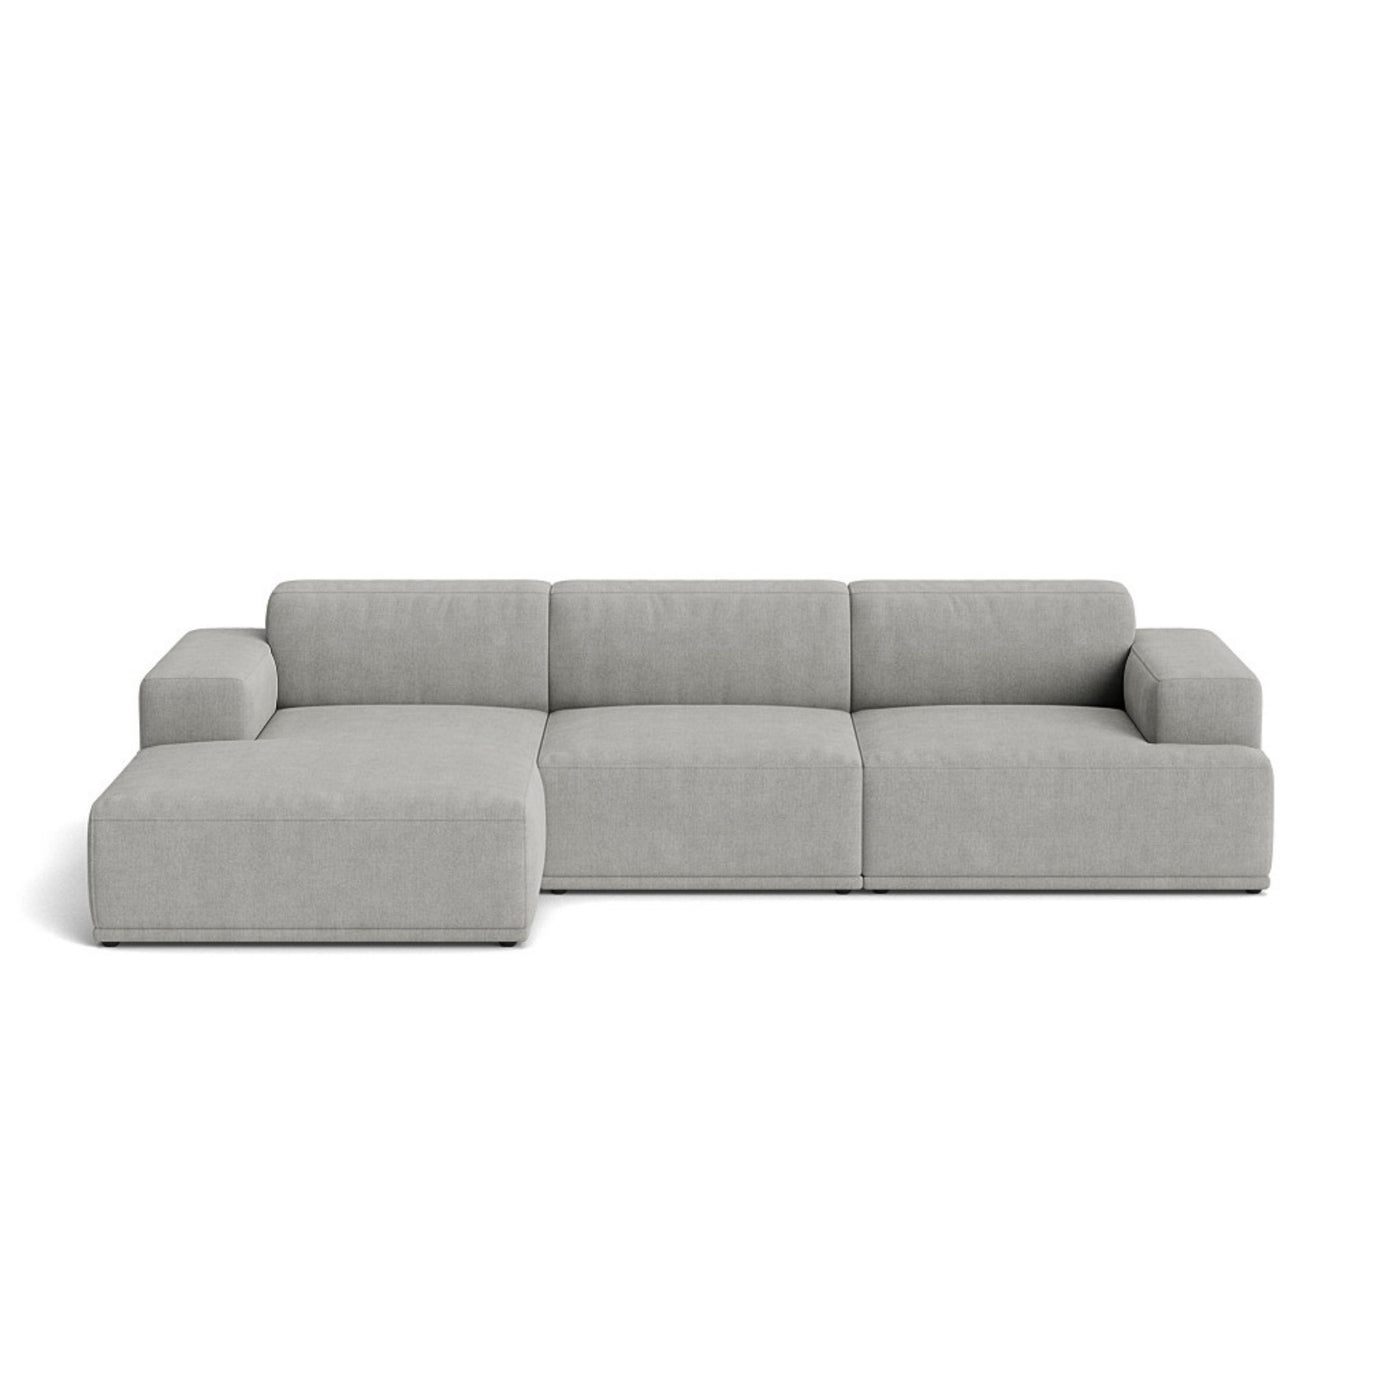 Muuto Connect Soft Modular 3 Seater Sofa, configuration 2. Made-to-order from someday designs. #colour_fiord-151